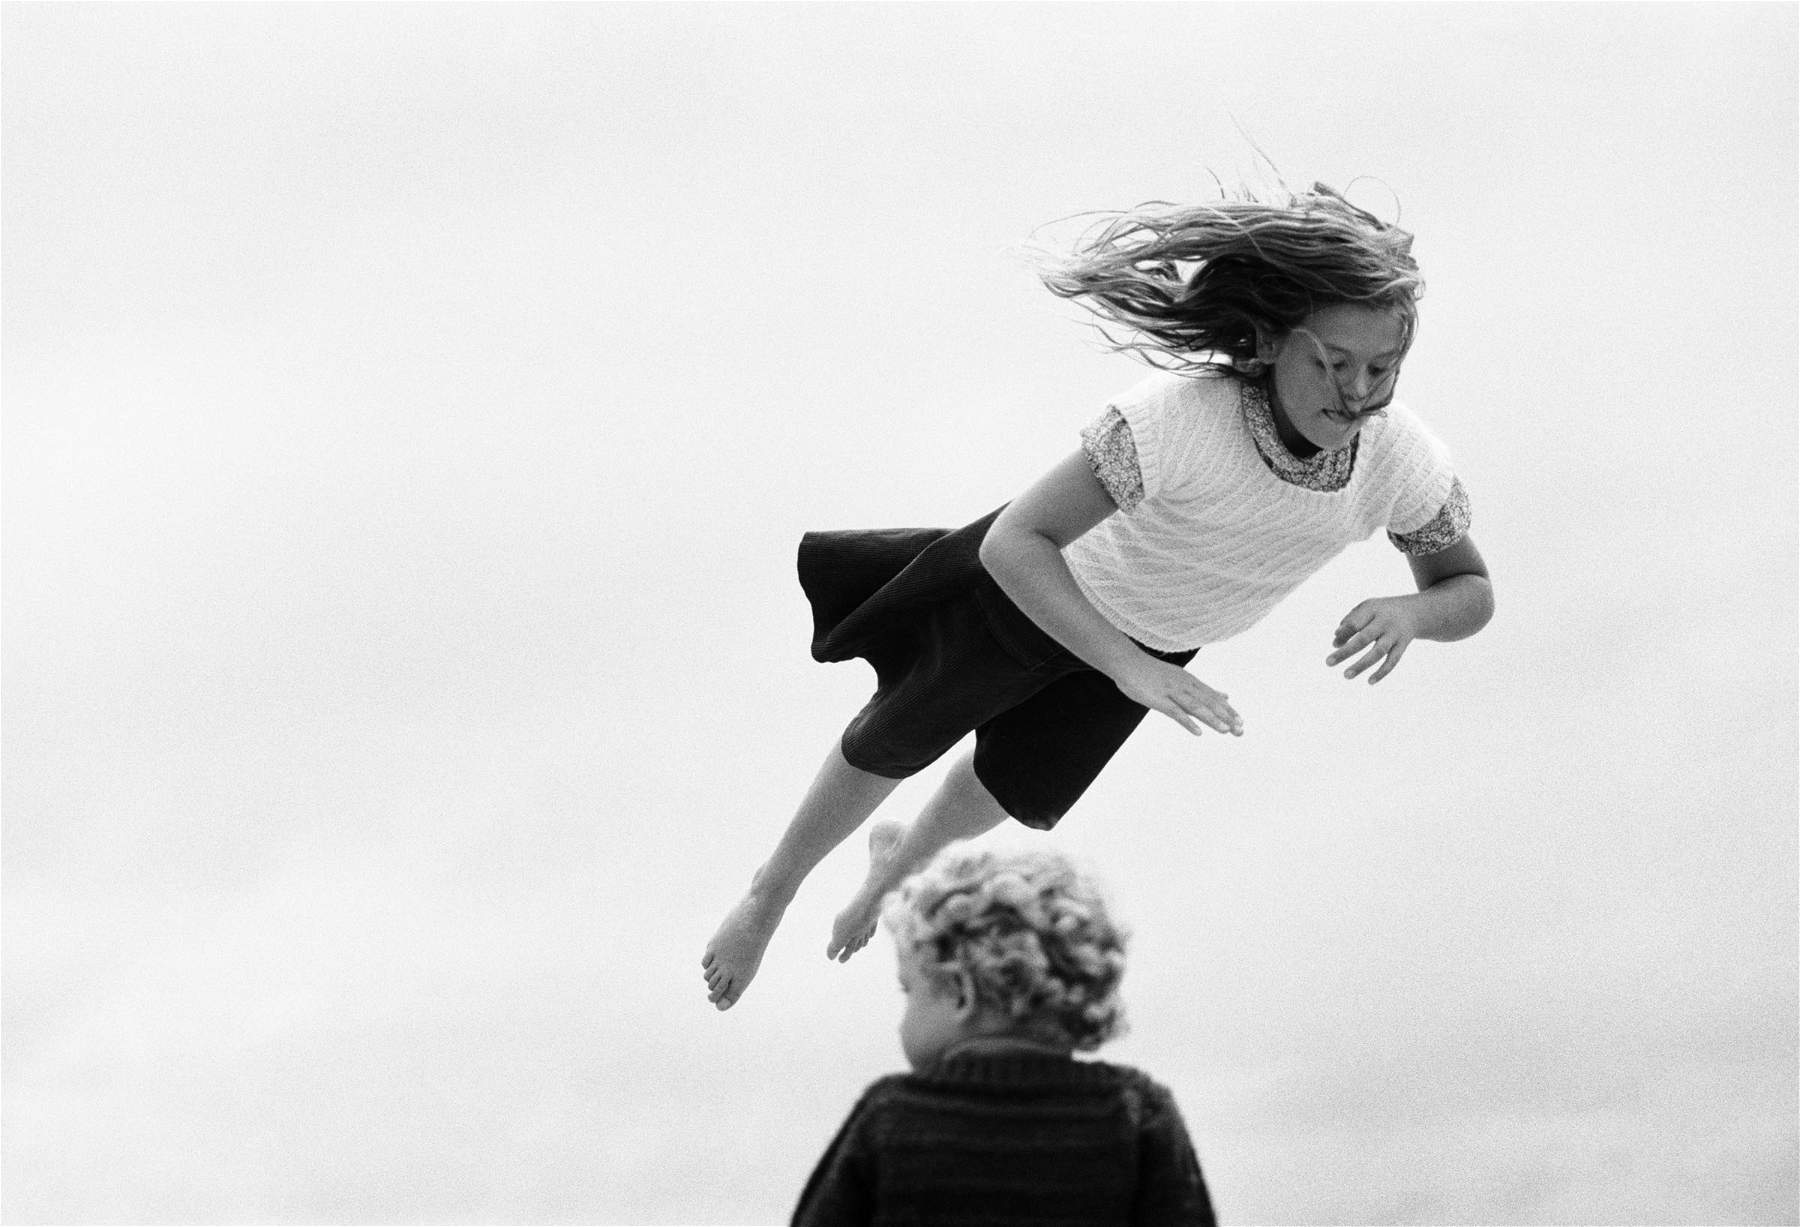 An exhibition on happiness: in Alba, the photographs of Jacques Henri Lartigue